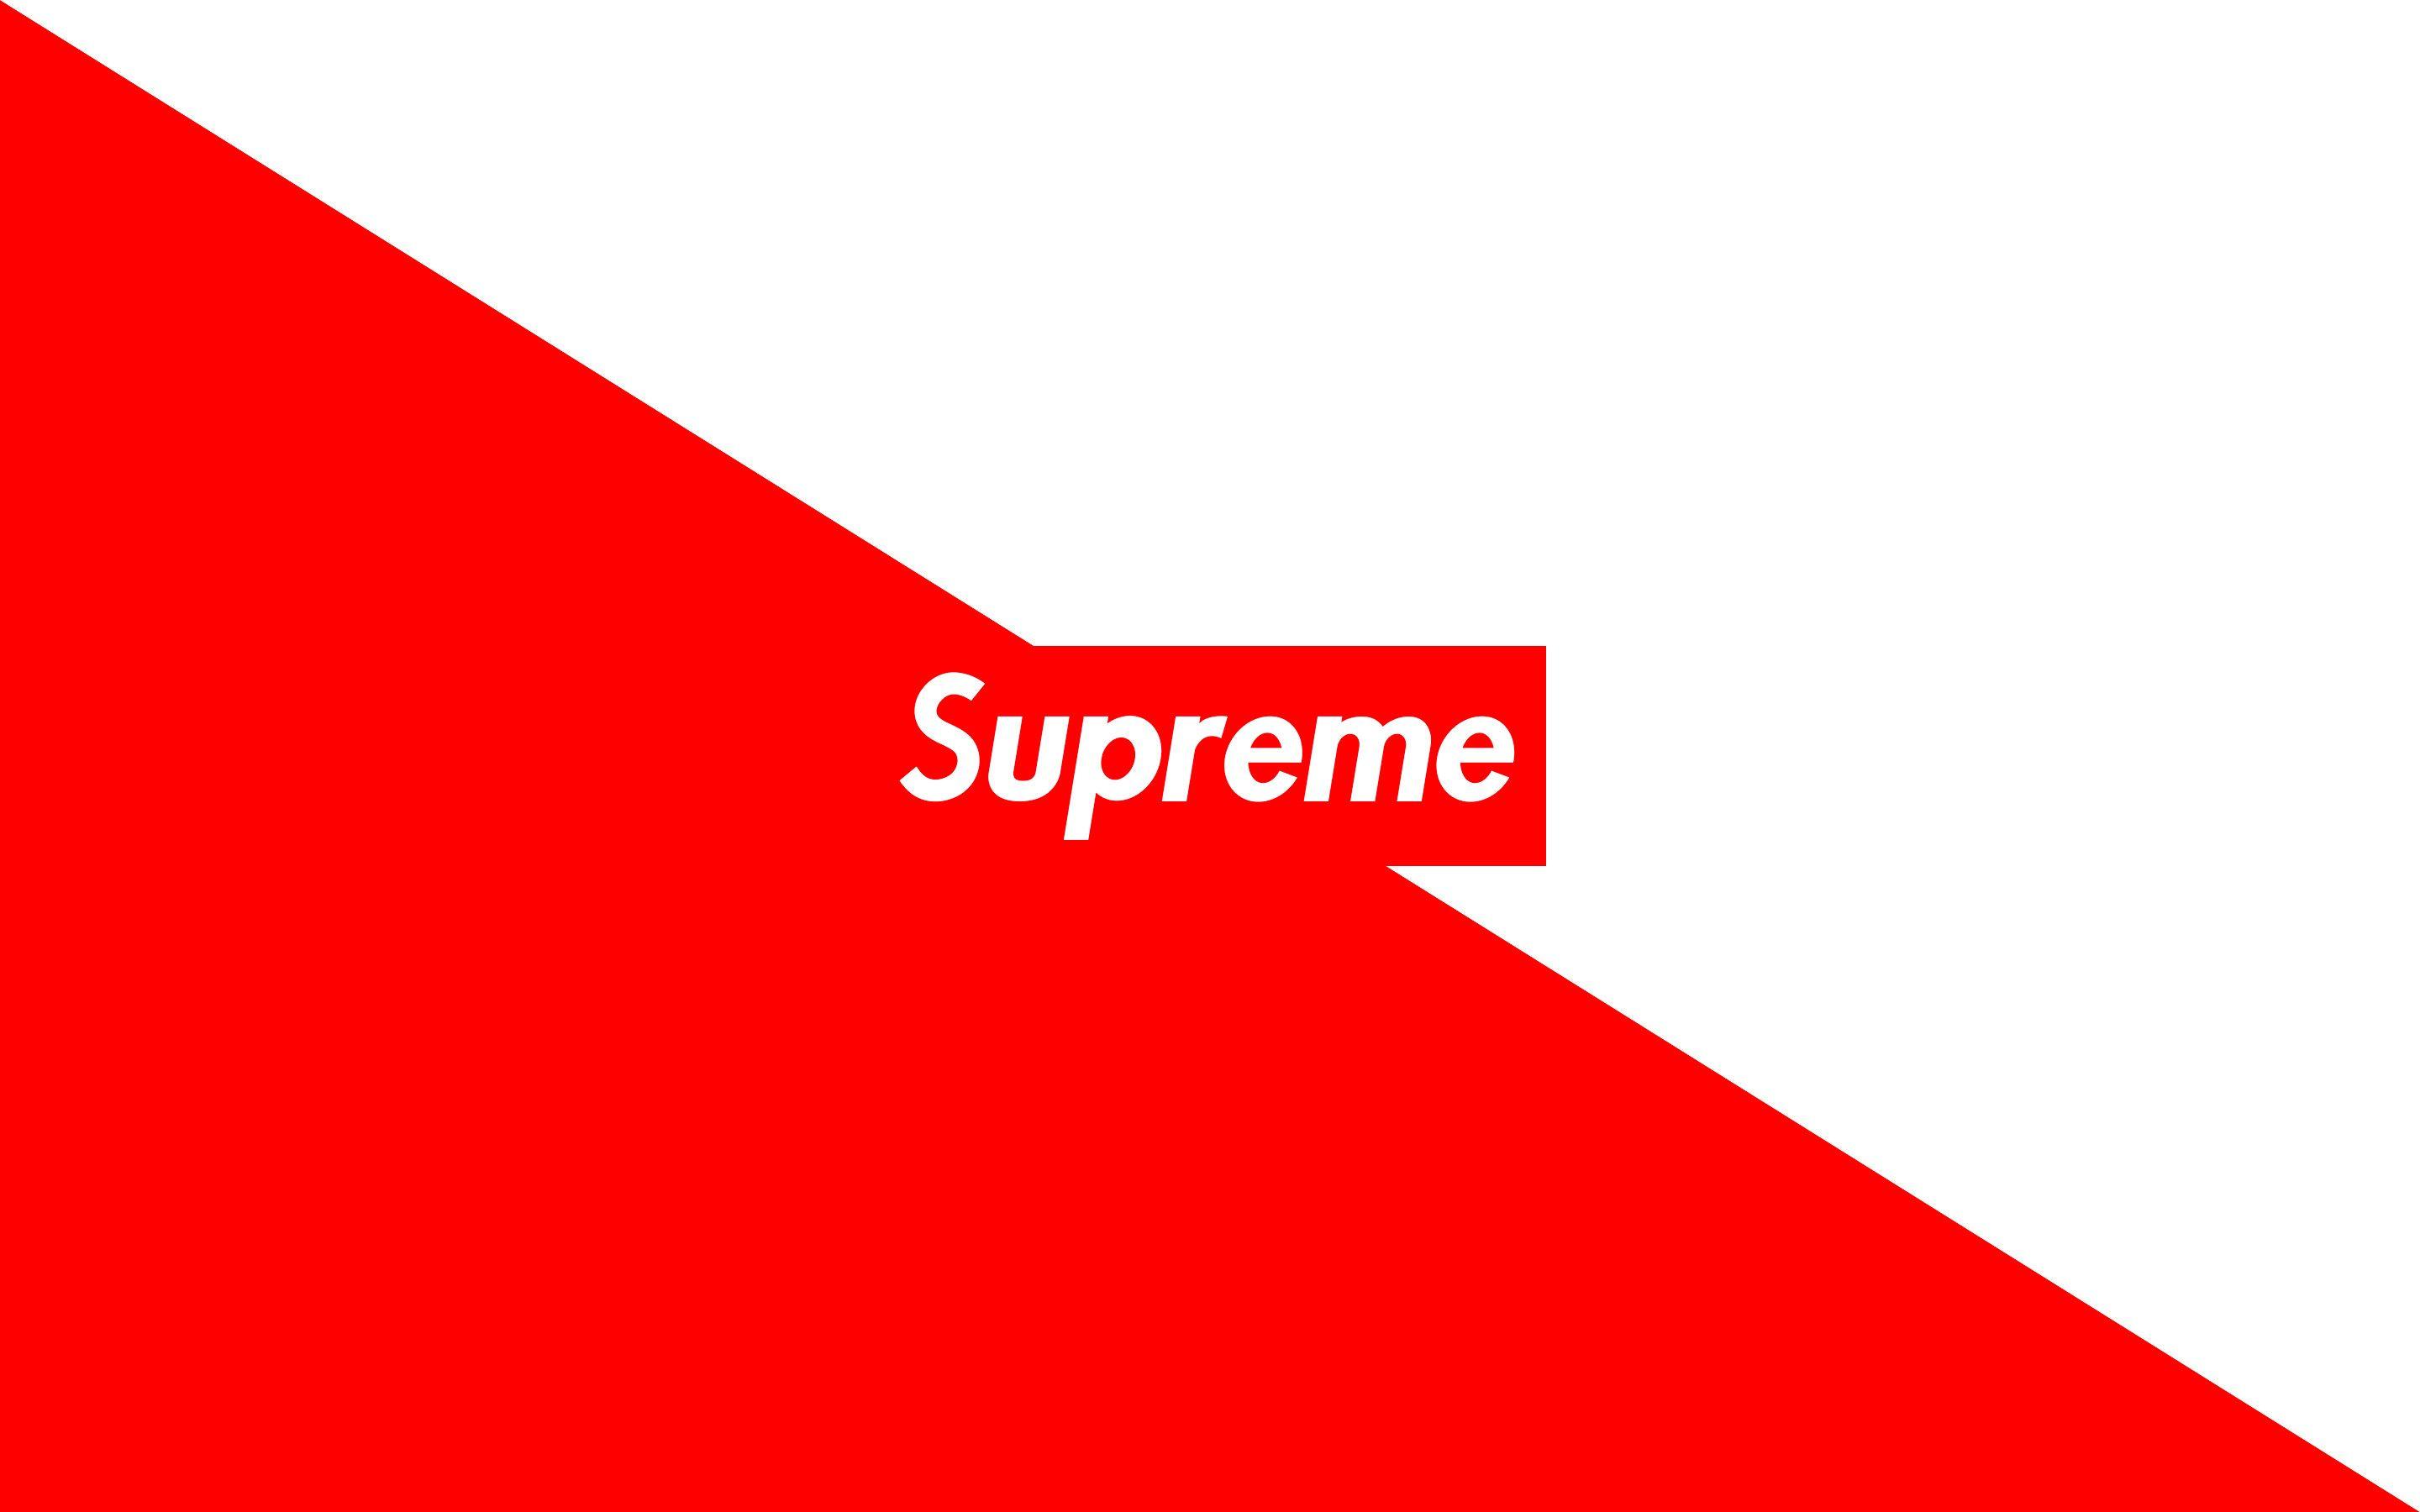 Gucci And Supreme Wallpapers - Wallpaper Cave